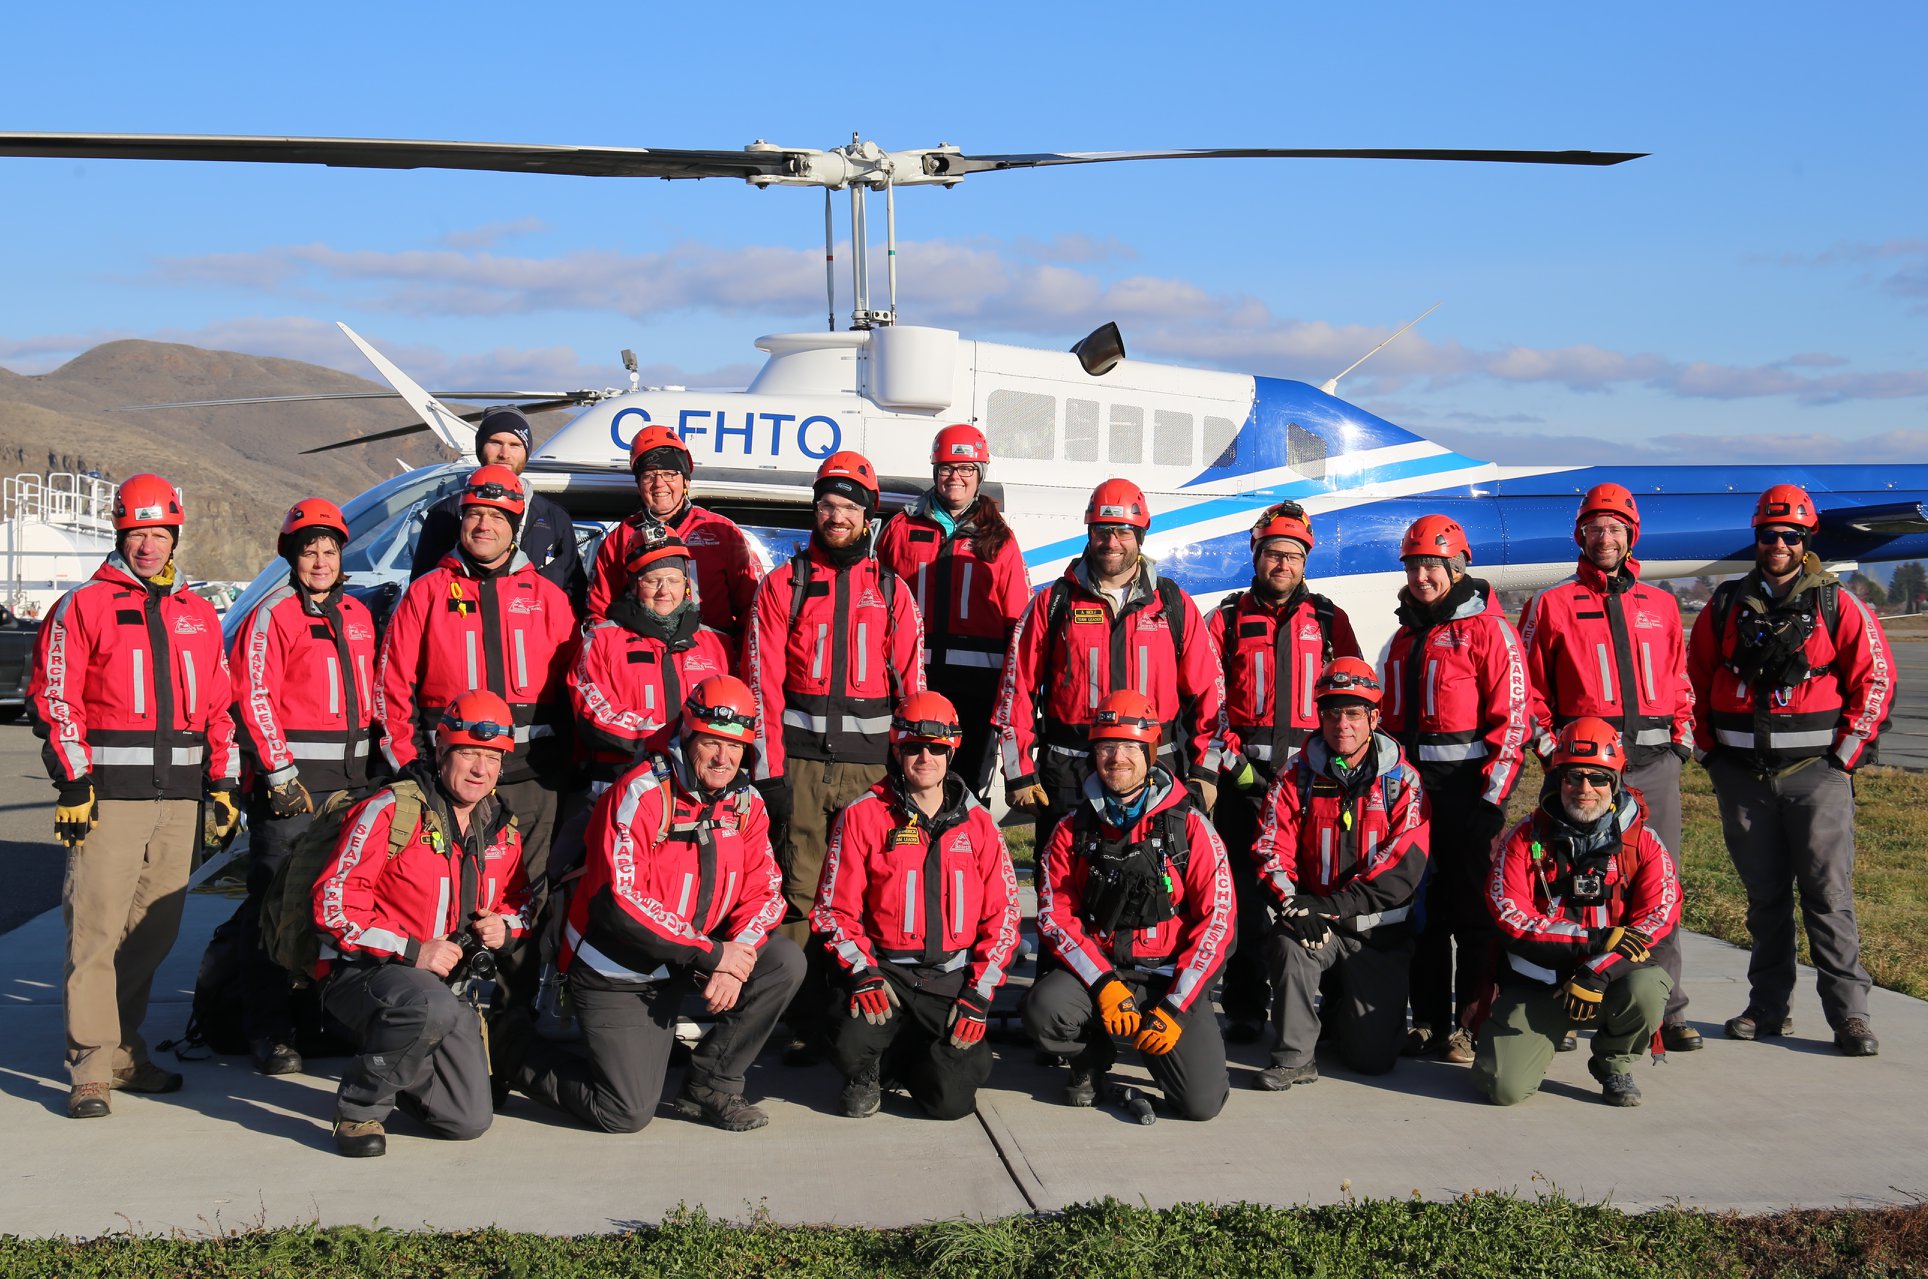 Camaraderie, great outdoors and a job well done draw volunteers to B.C. search and rescue teams